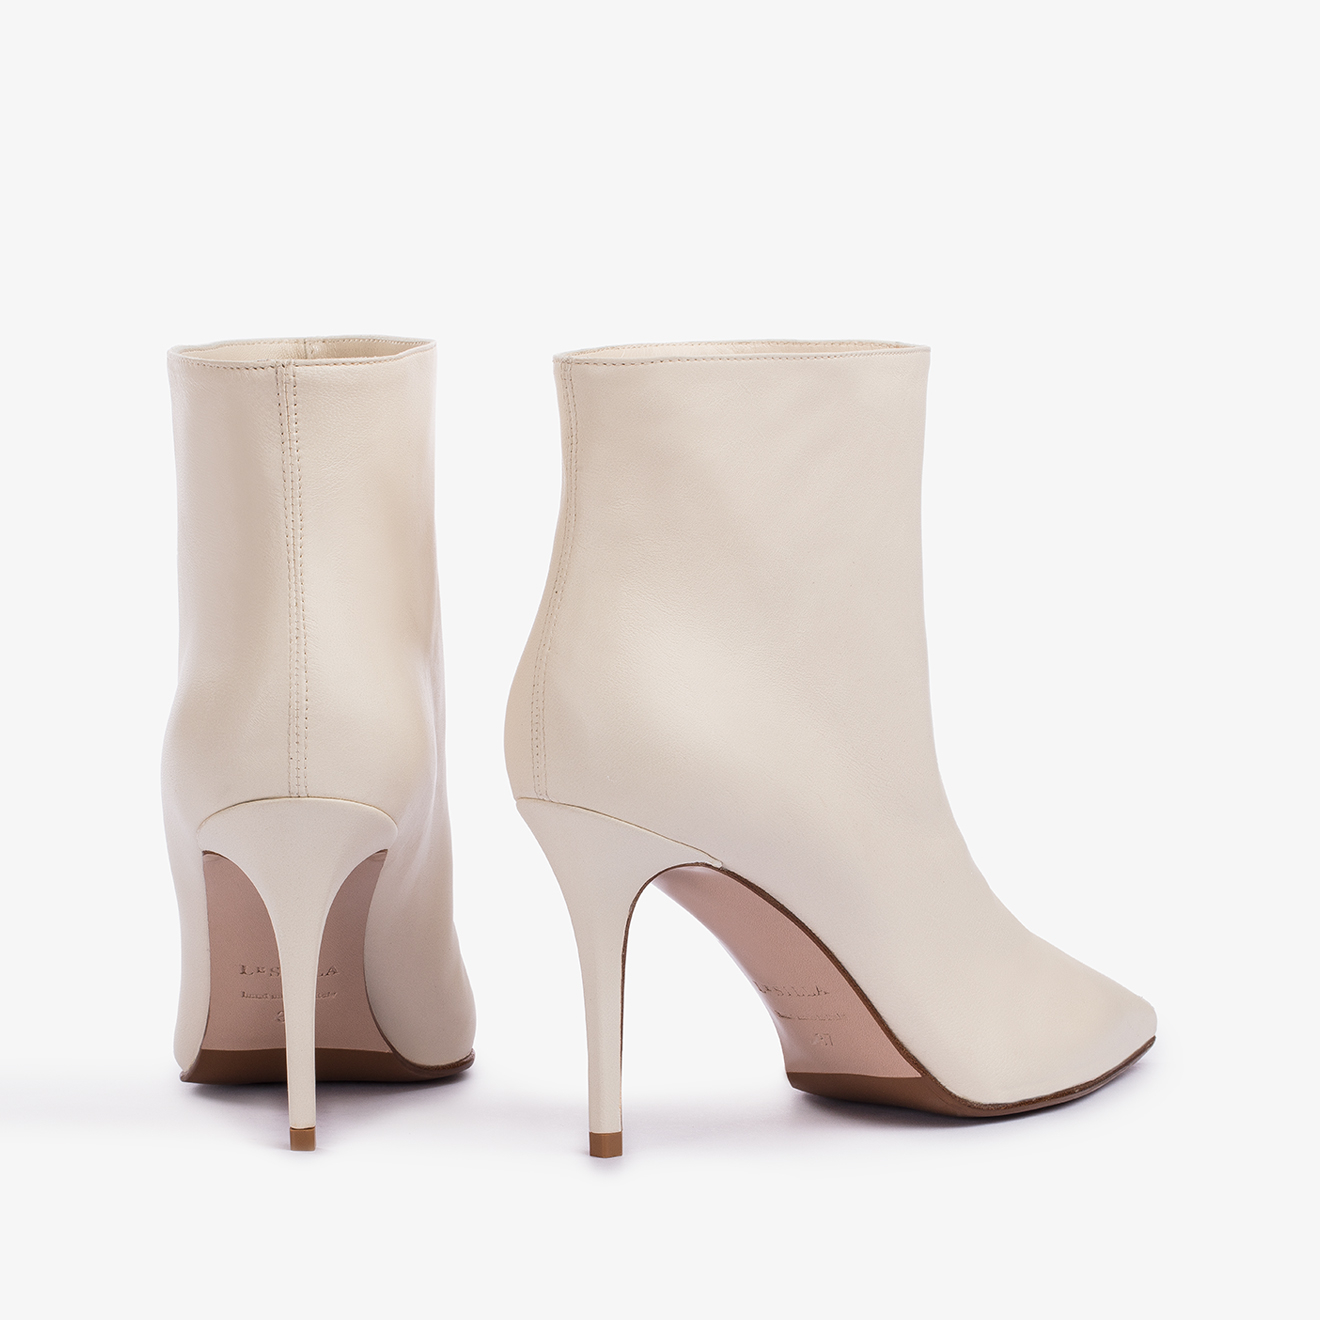 EVA ANKLE BOOT 90 mm - Le Silla official outlet